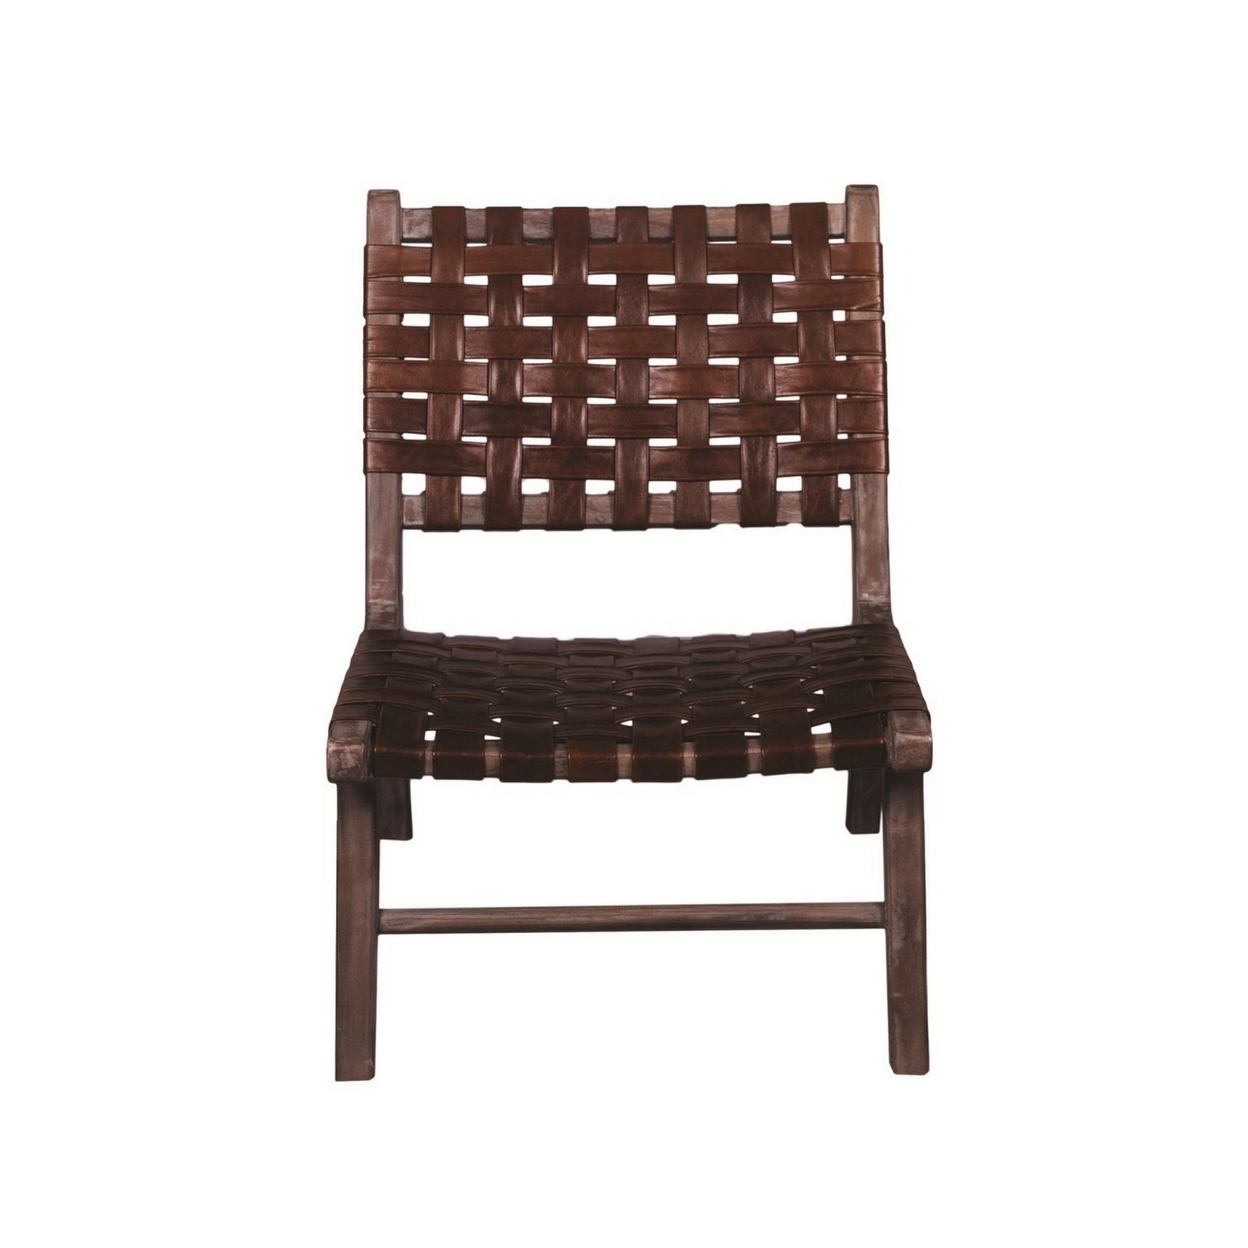 29 Inch Armless Accent Chair, Woven Top Grain Leather Strips, Coffee Brown- Saltoro Sherpi